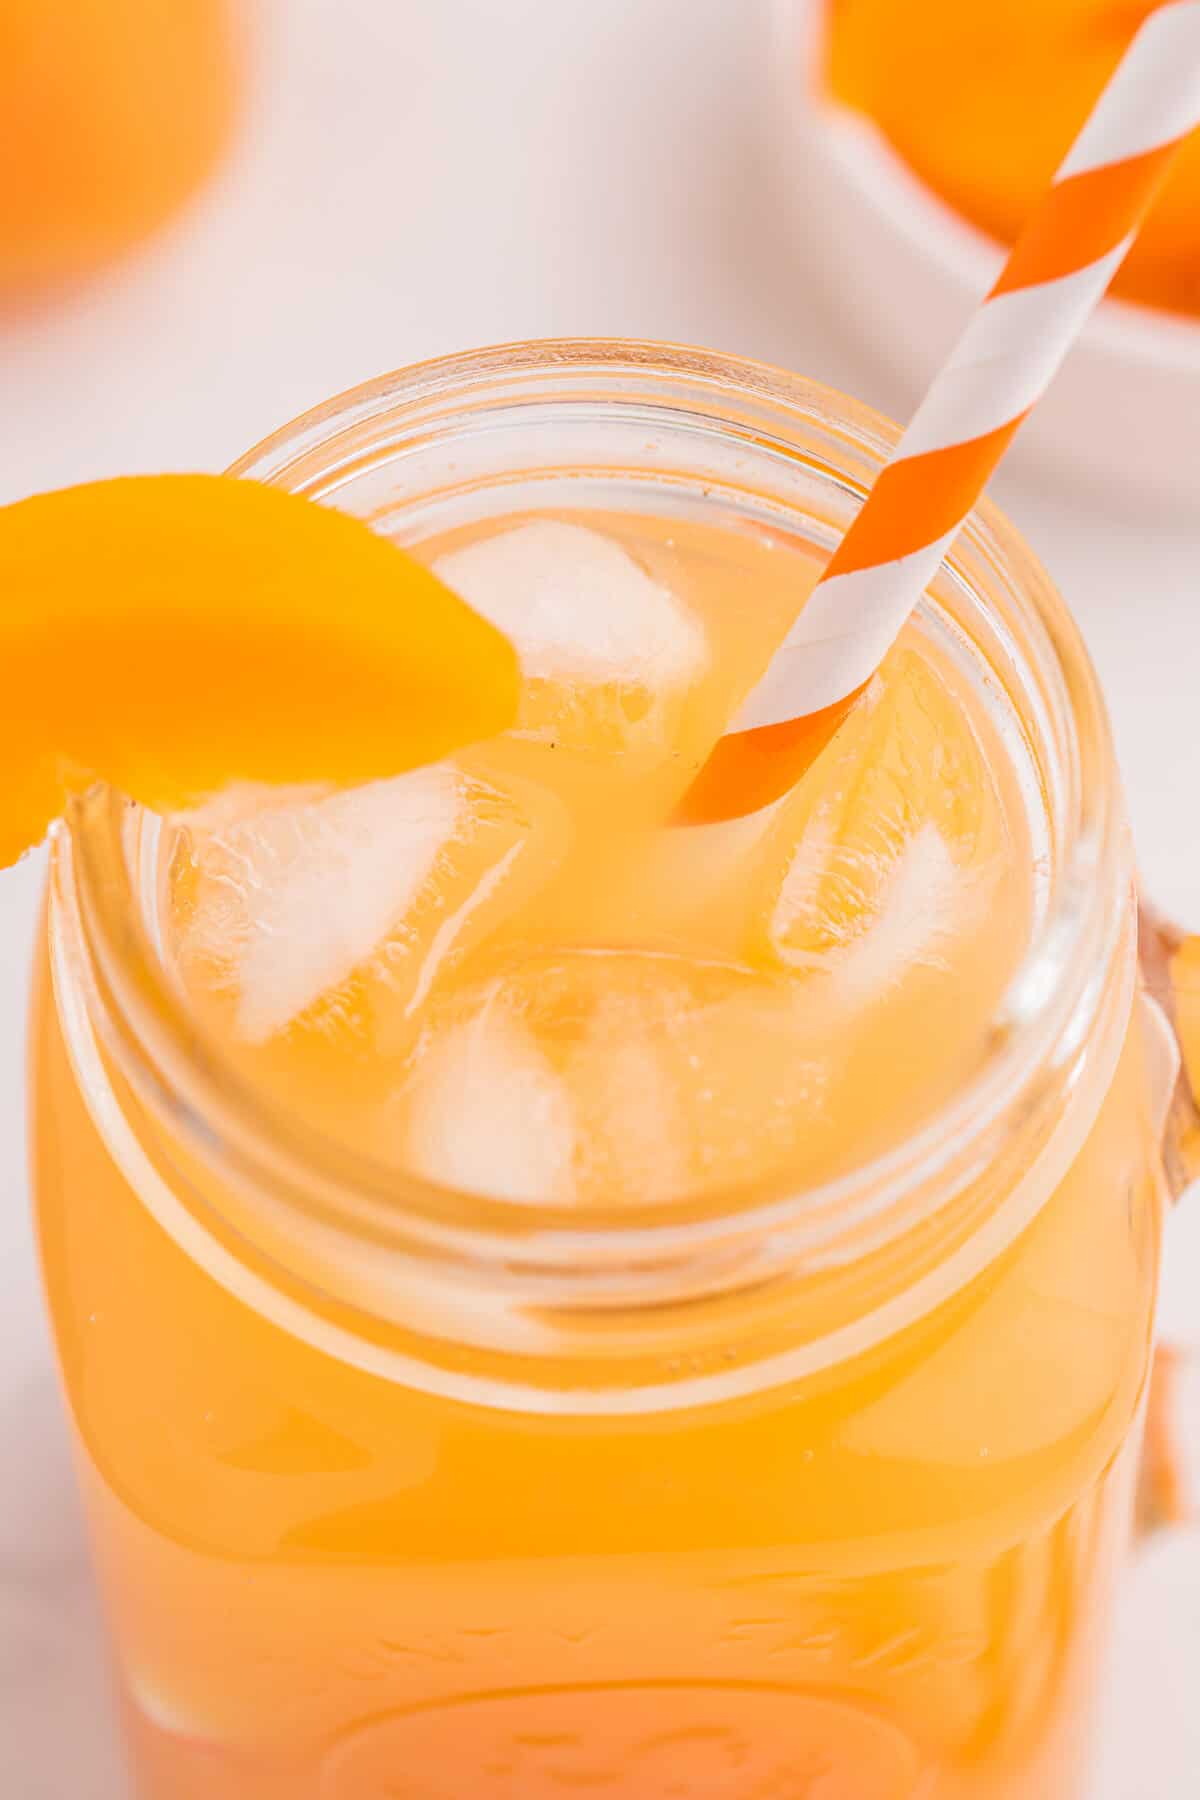 Peachy Sparkler - This sweet and bubbly mocktail full of peach flavour can be enjoyed by everyone...but would be a fantastic adult beverage with the addition of your favourite spirit. Enjoy on a hot summer day, soaking in the sun!